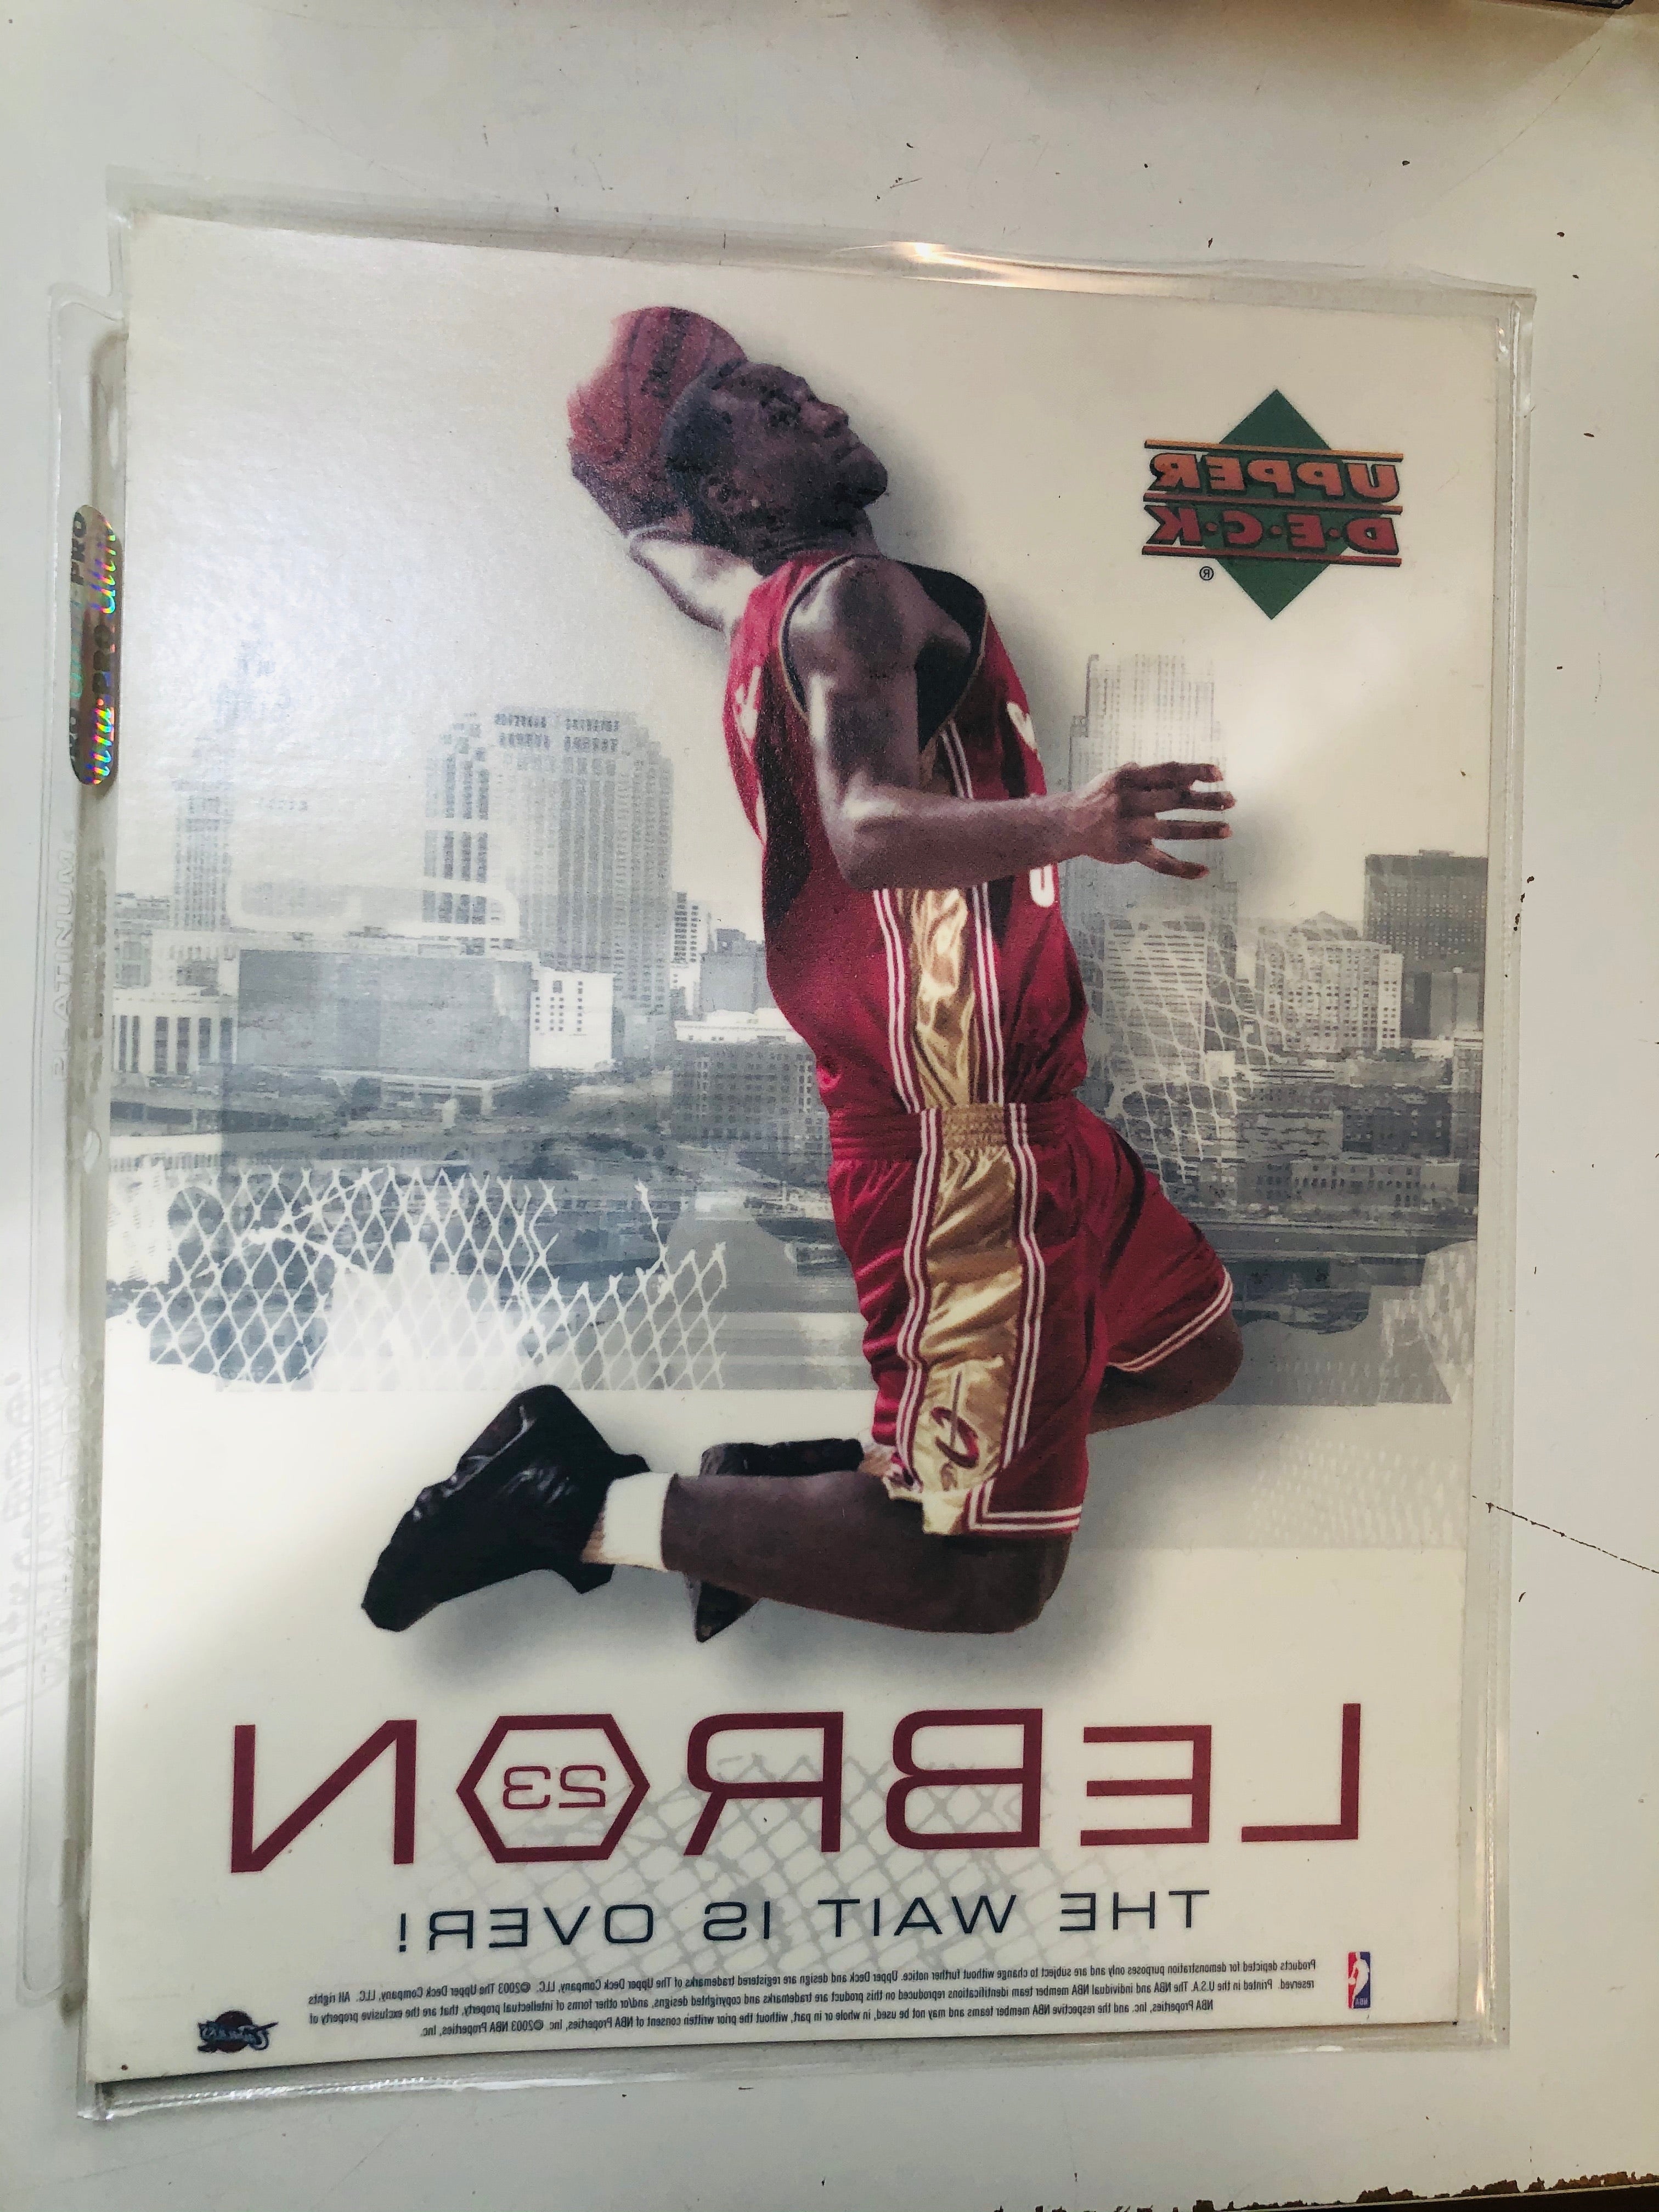 LeBron James Upper Deck basketball rare store sign for the glass door 2003